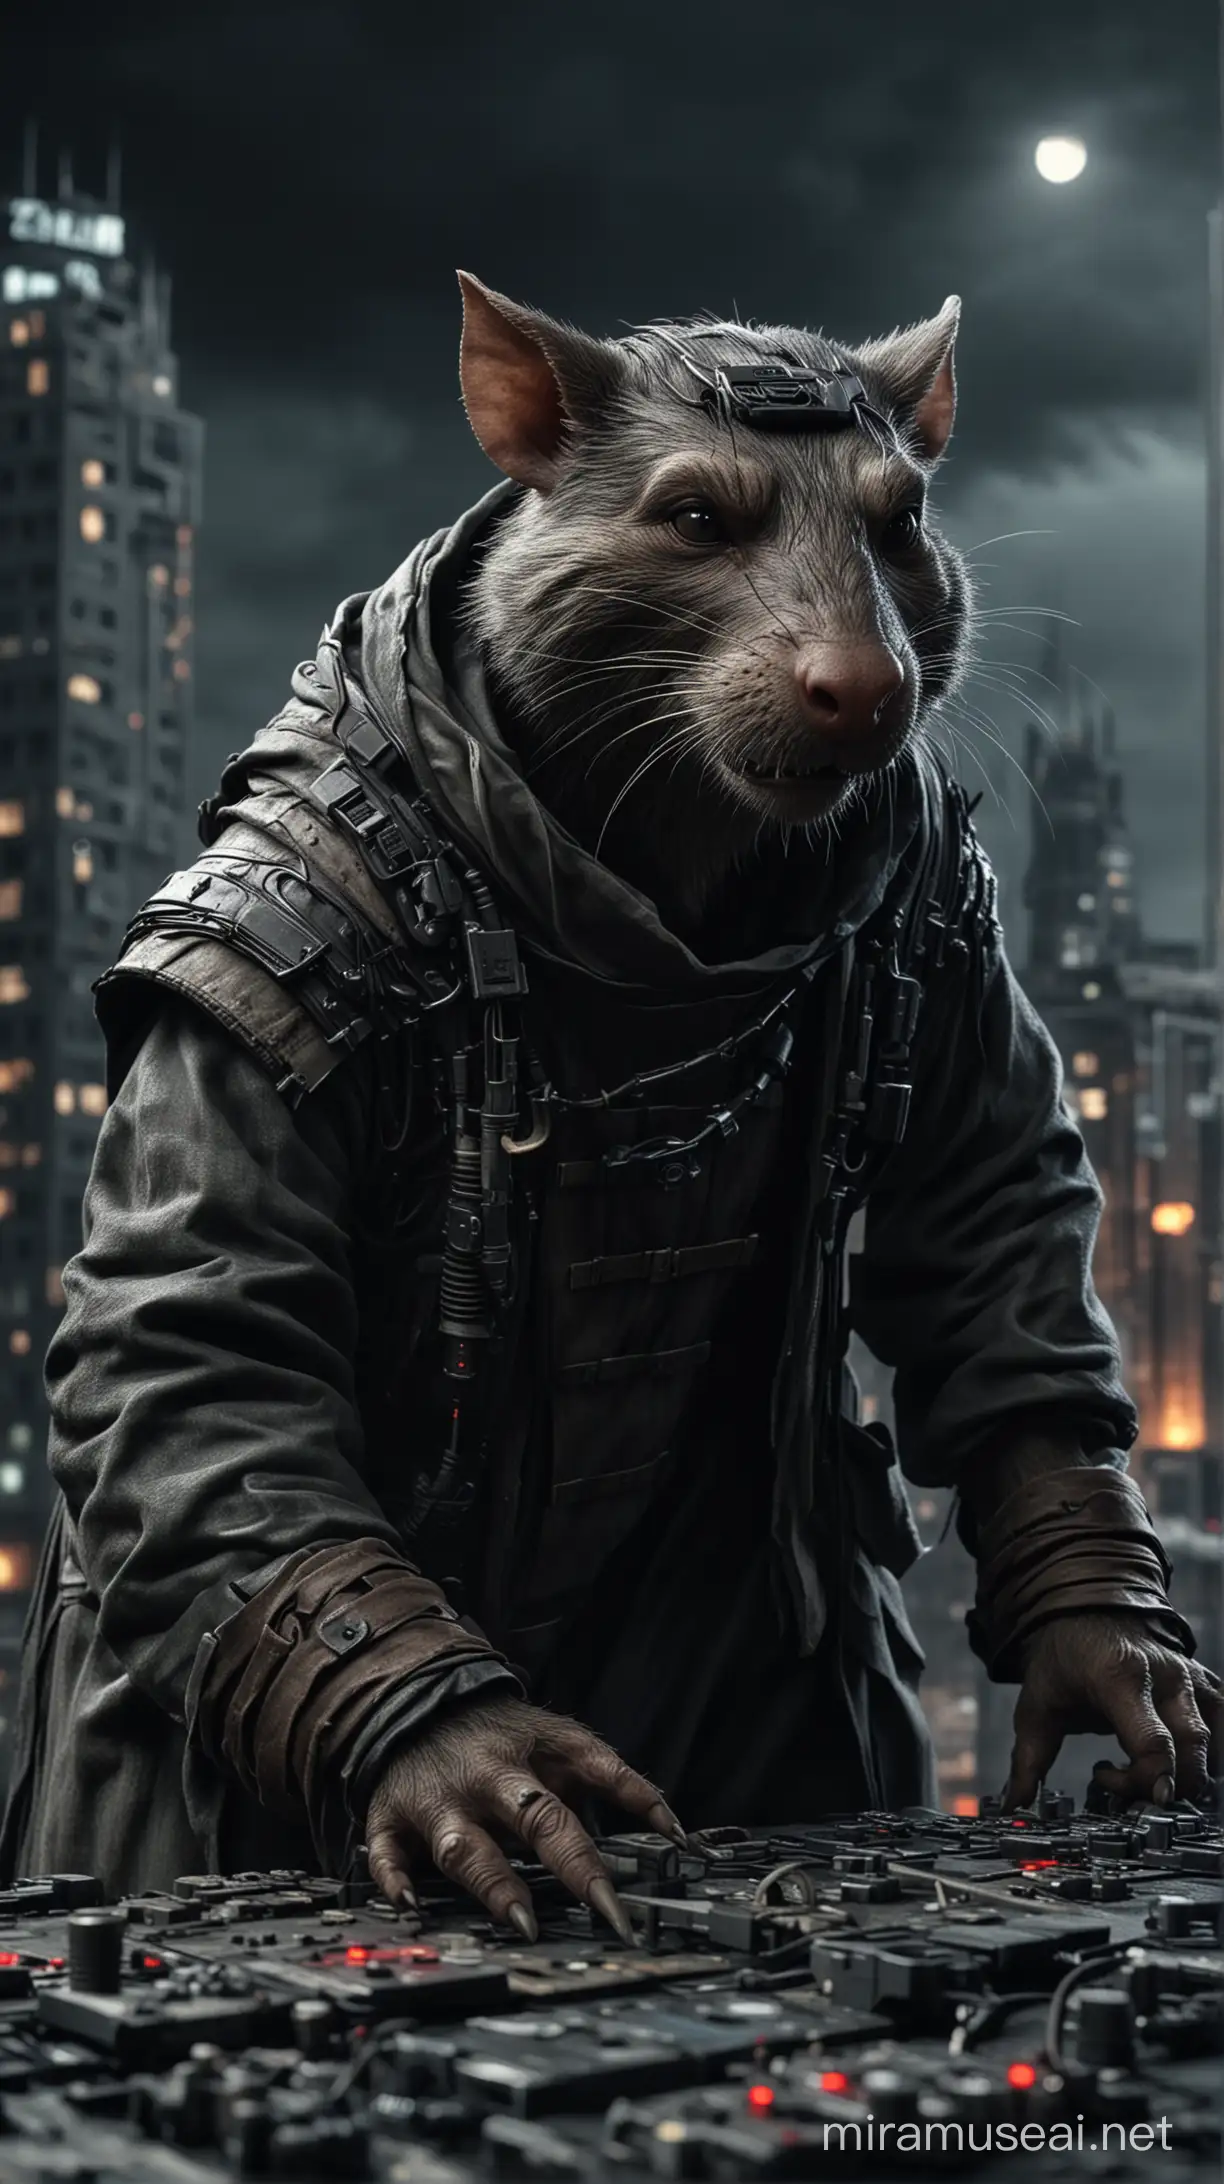 Master Splinter ,darkness Electronic, Photo realistic,dark apocalypses cityscape backdrop, cinematic, HDR.close up view